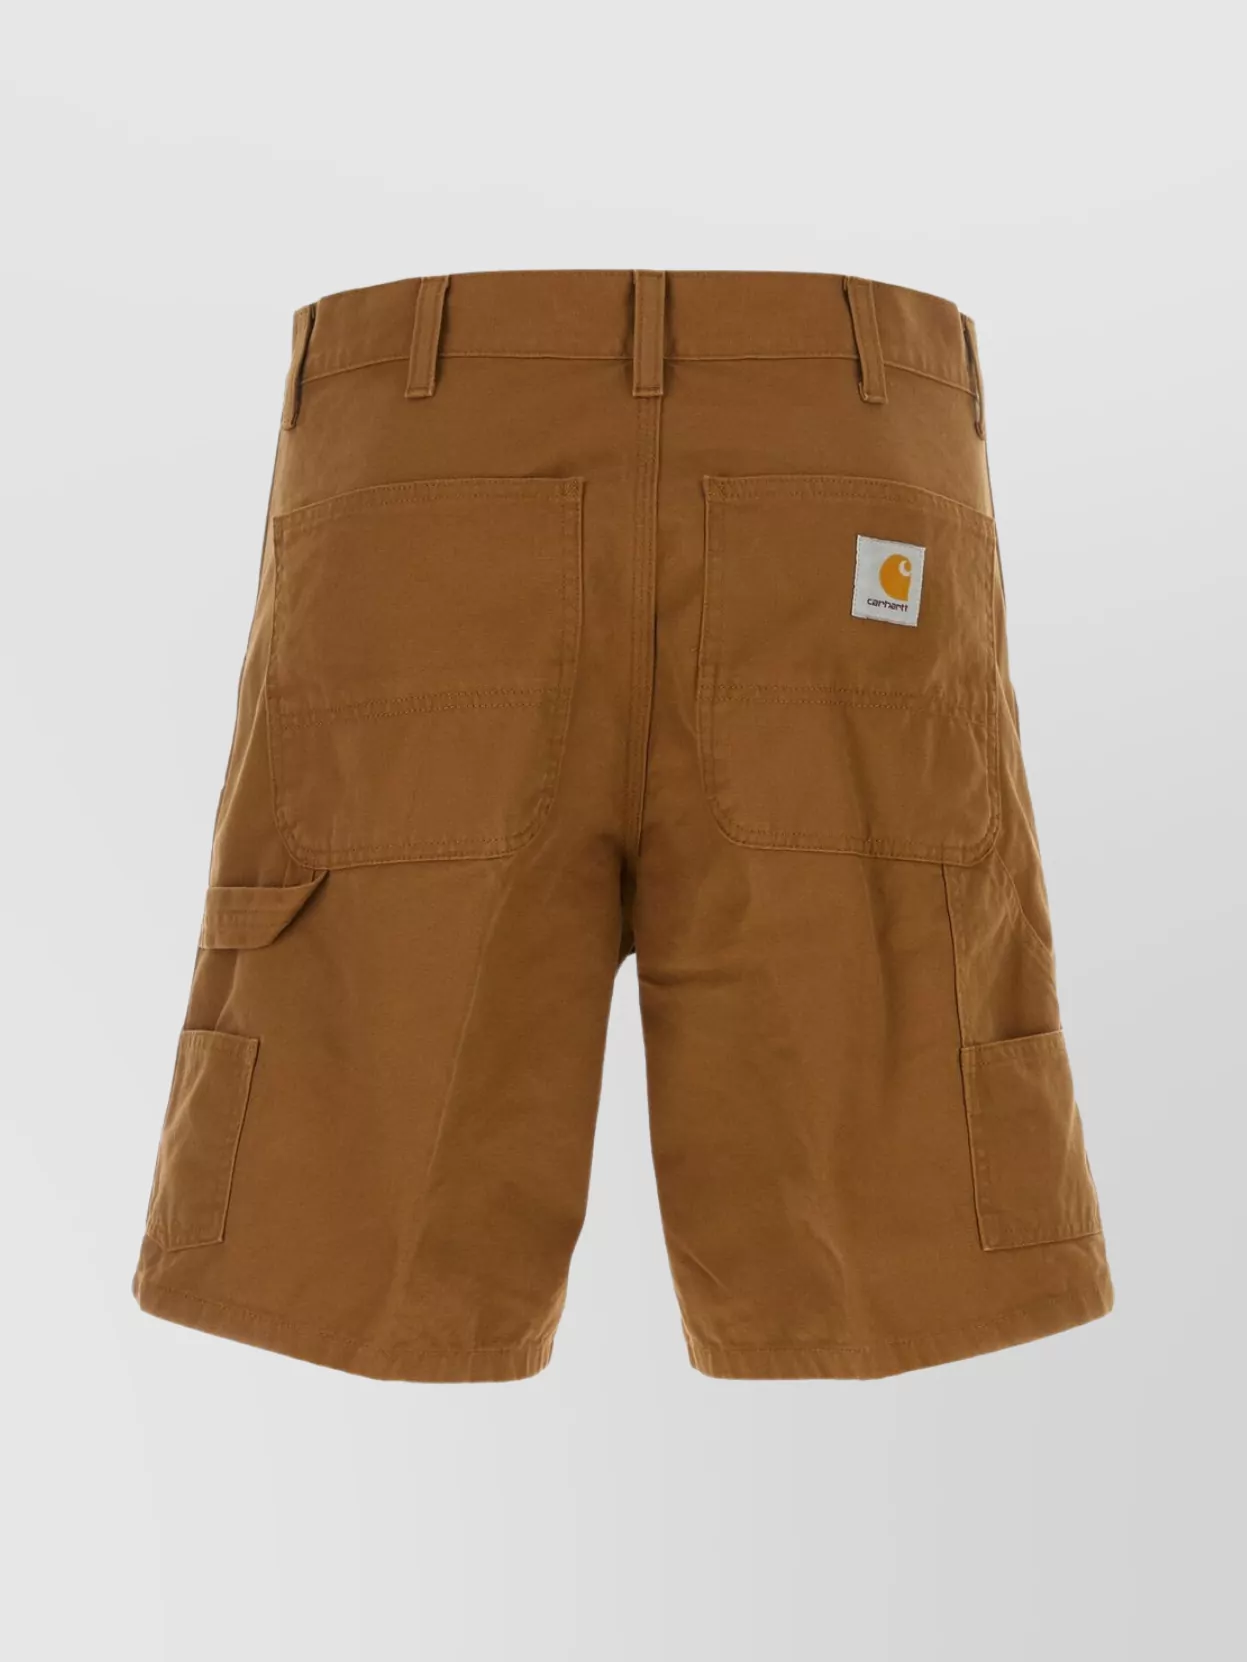 Carhartt Double Knee Shorts With Waist Belt Loops In Brown